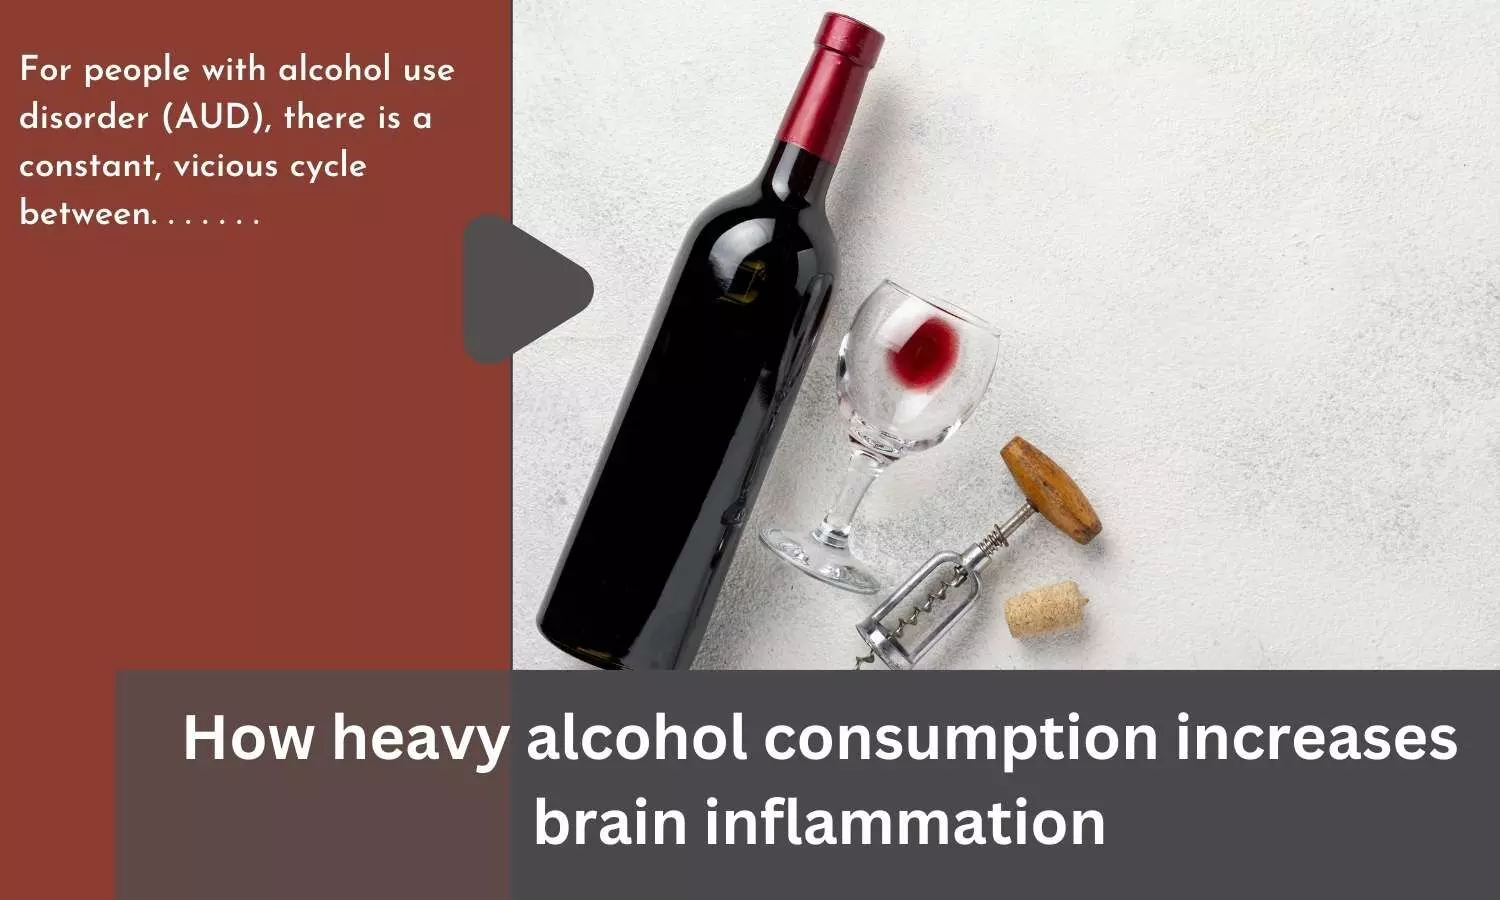 How heavy alcohol consumption increases brain inflammation